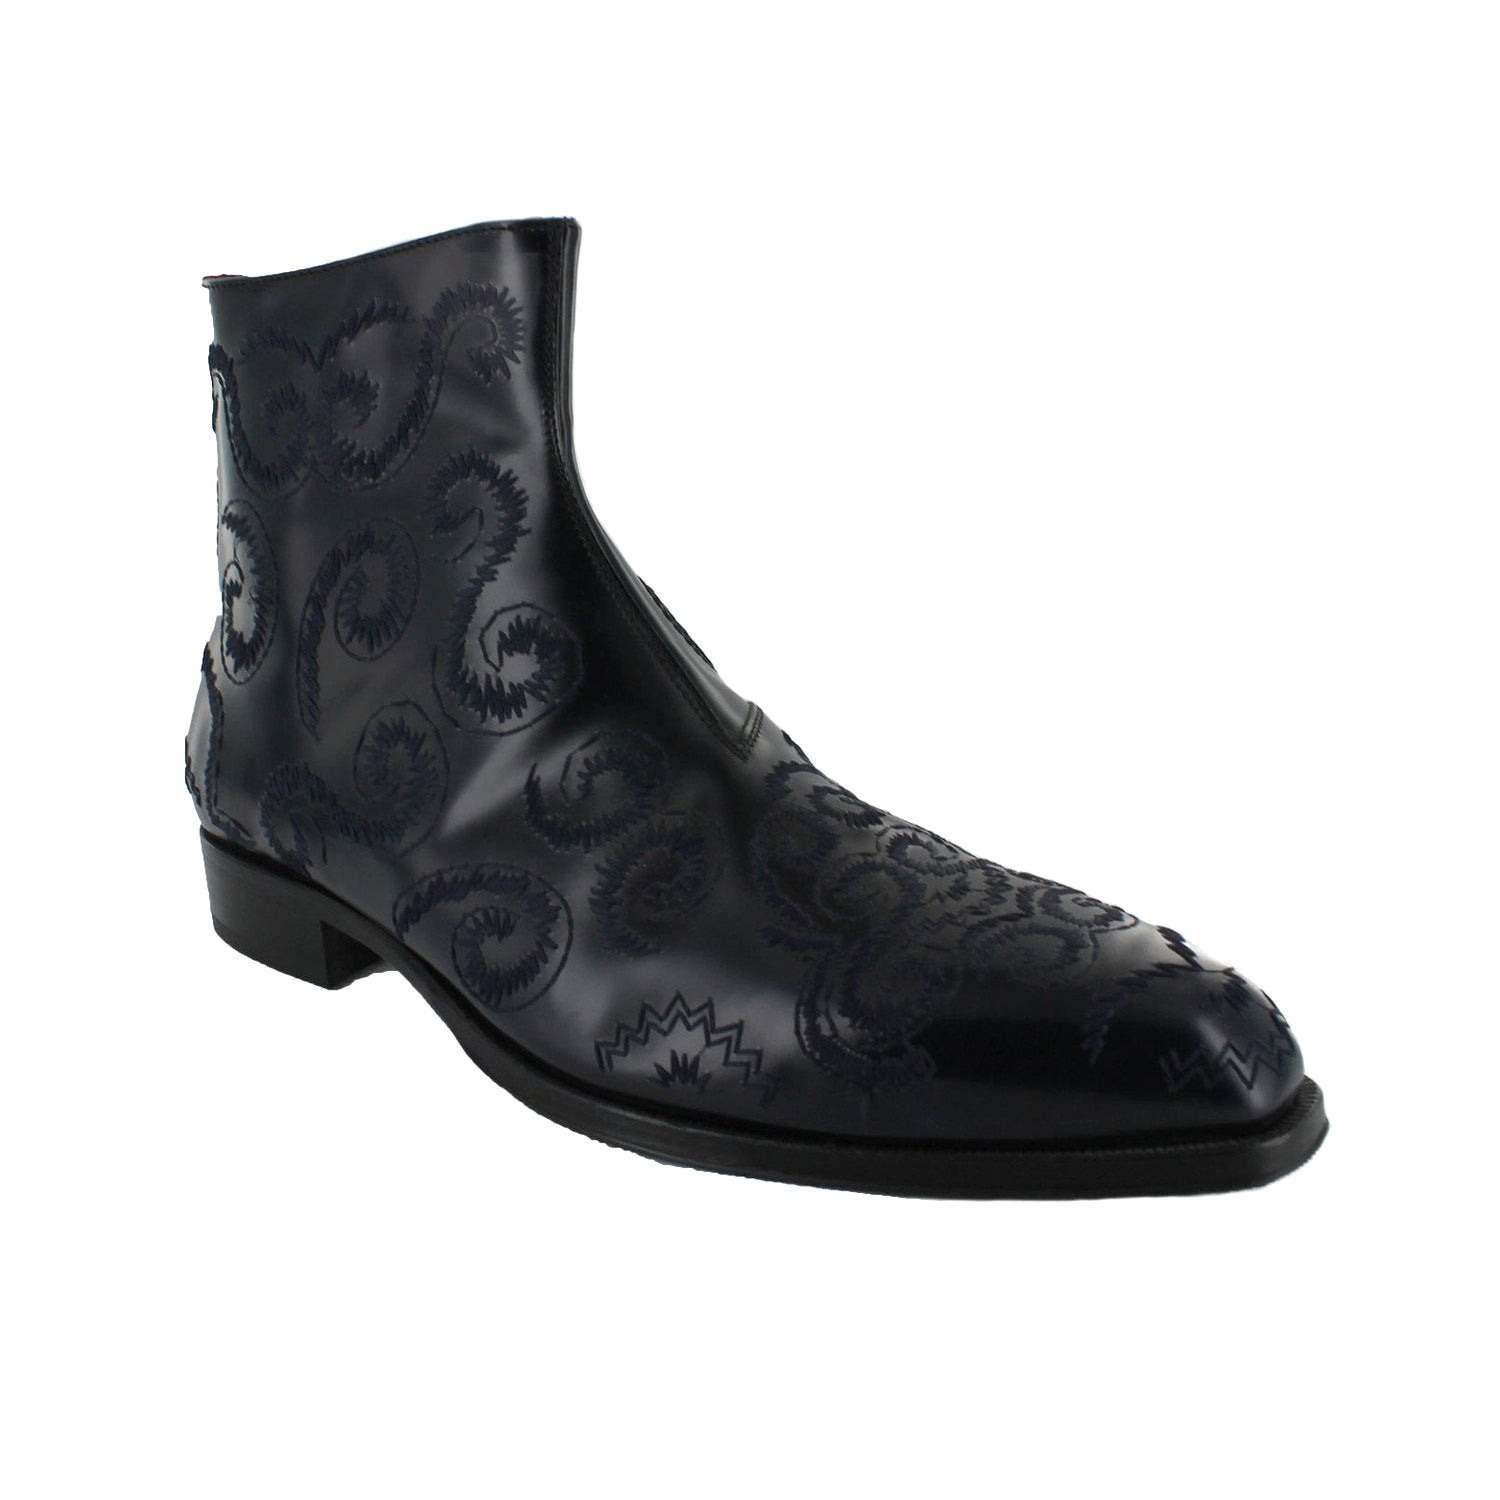 S5904 -  Black Embroided Boot